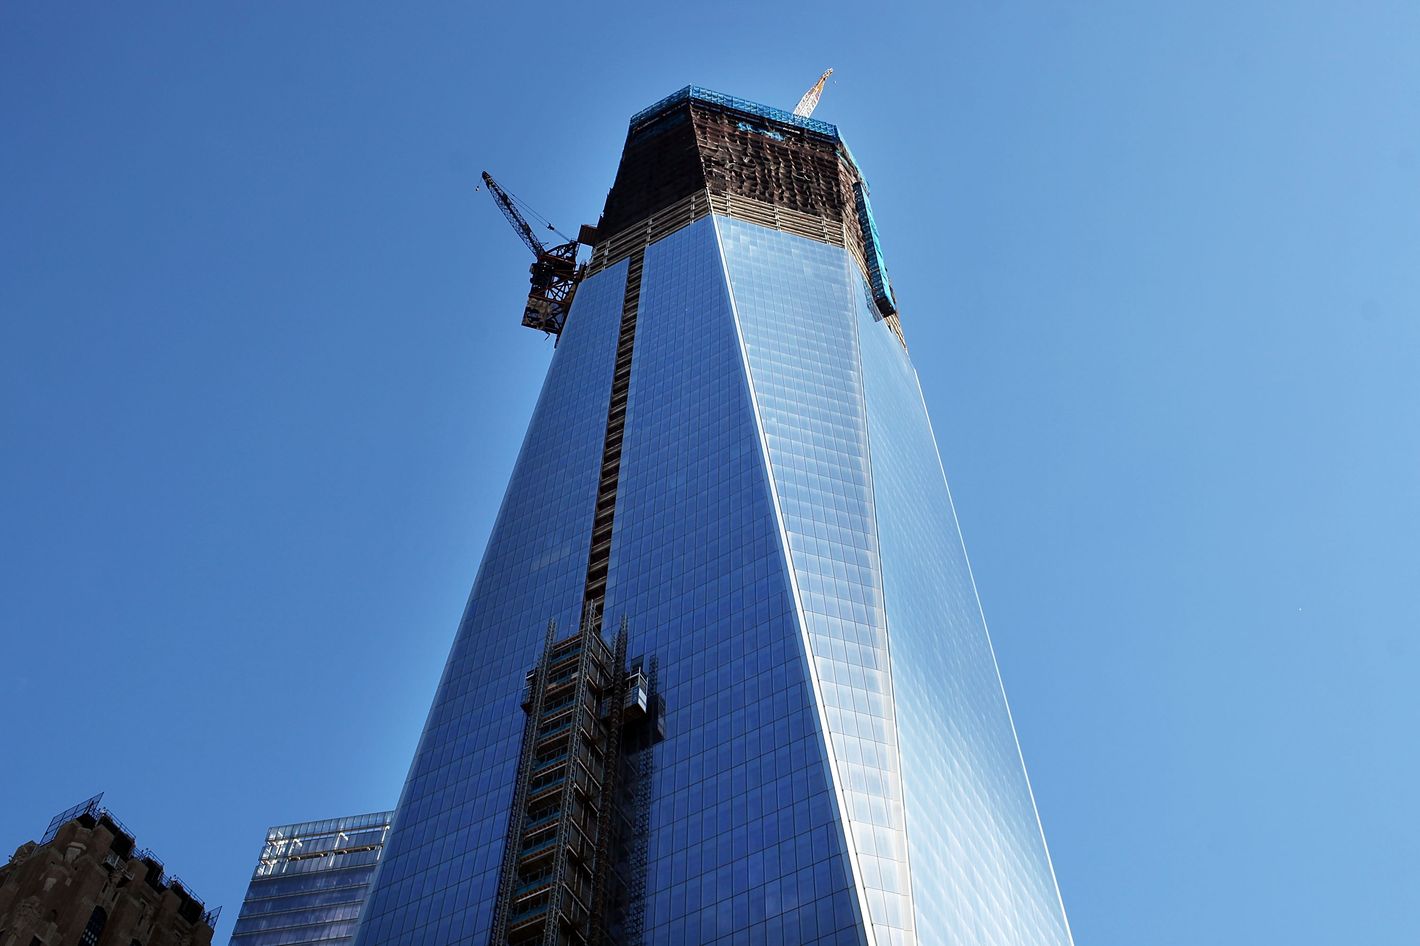 One World Trade Center - The Highest Building in New Yorl